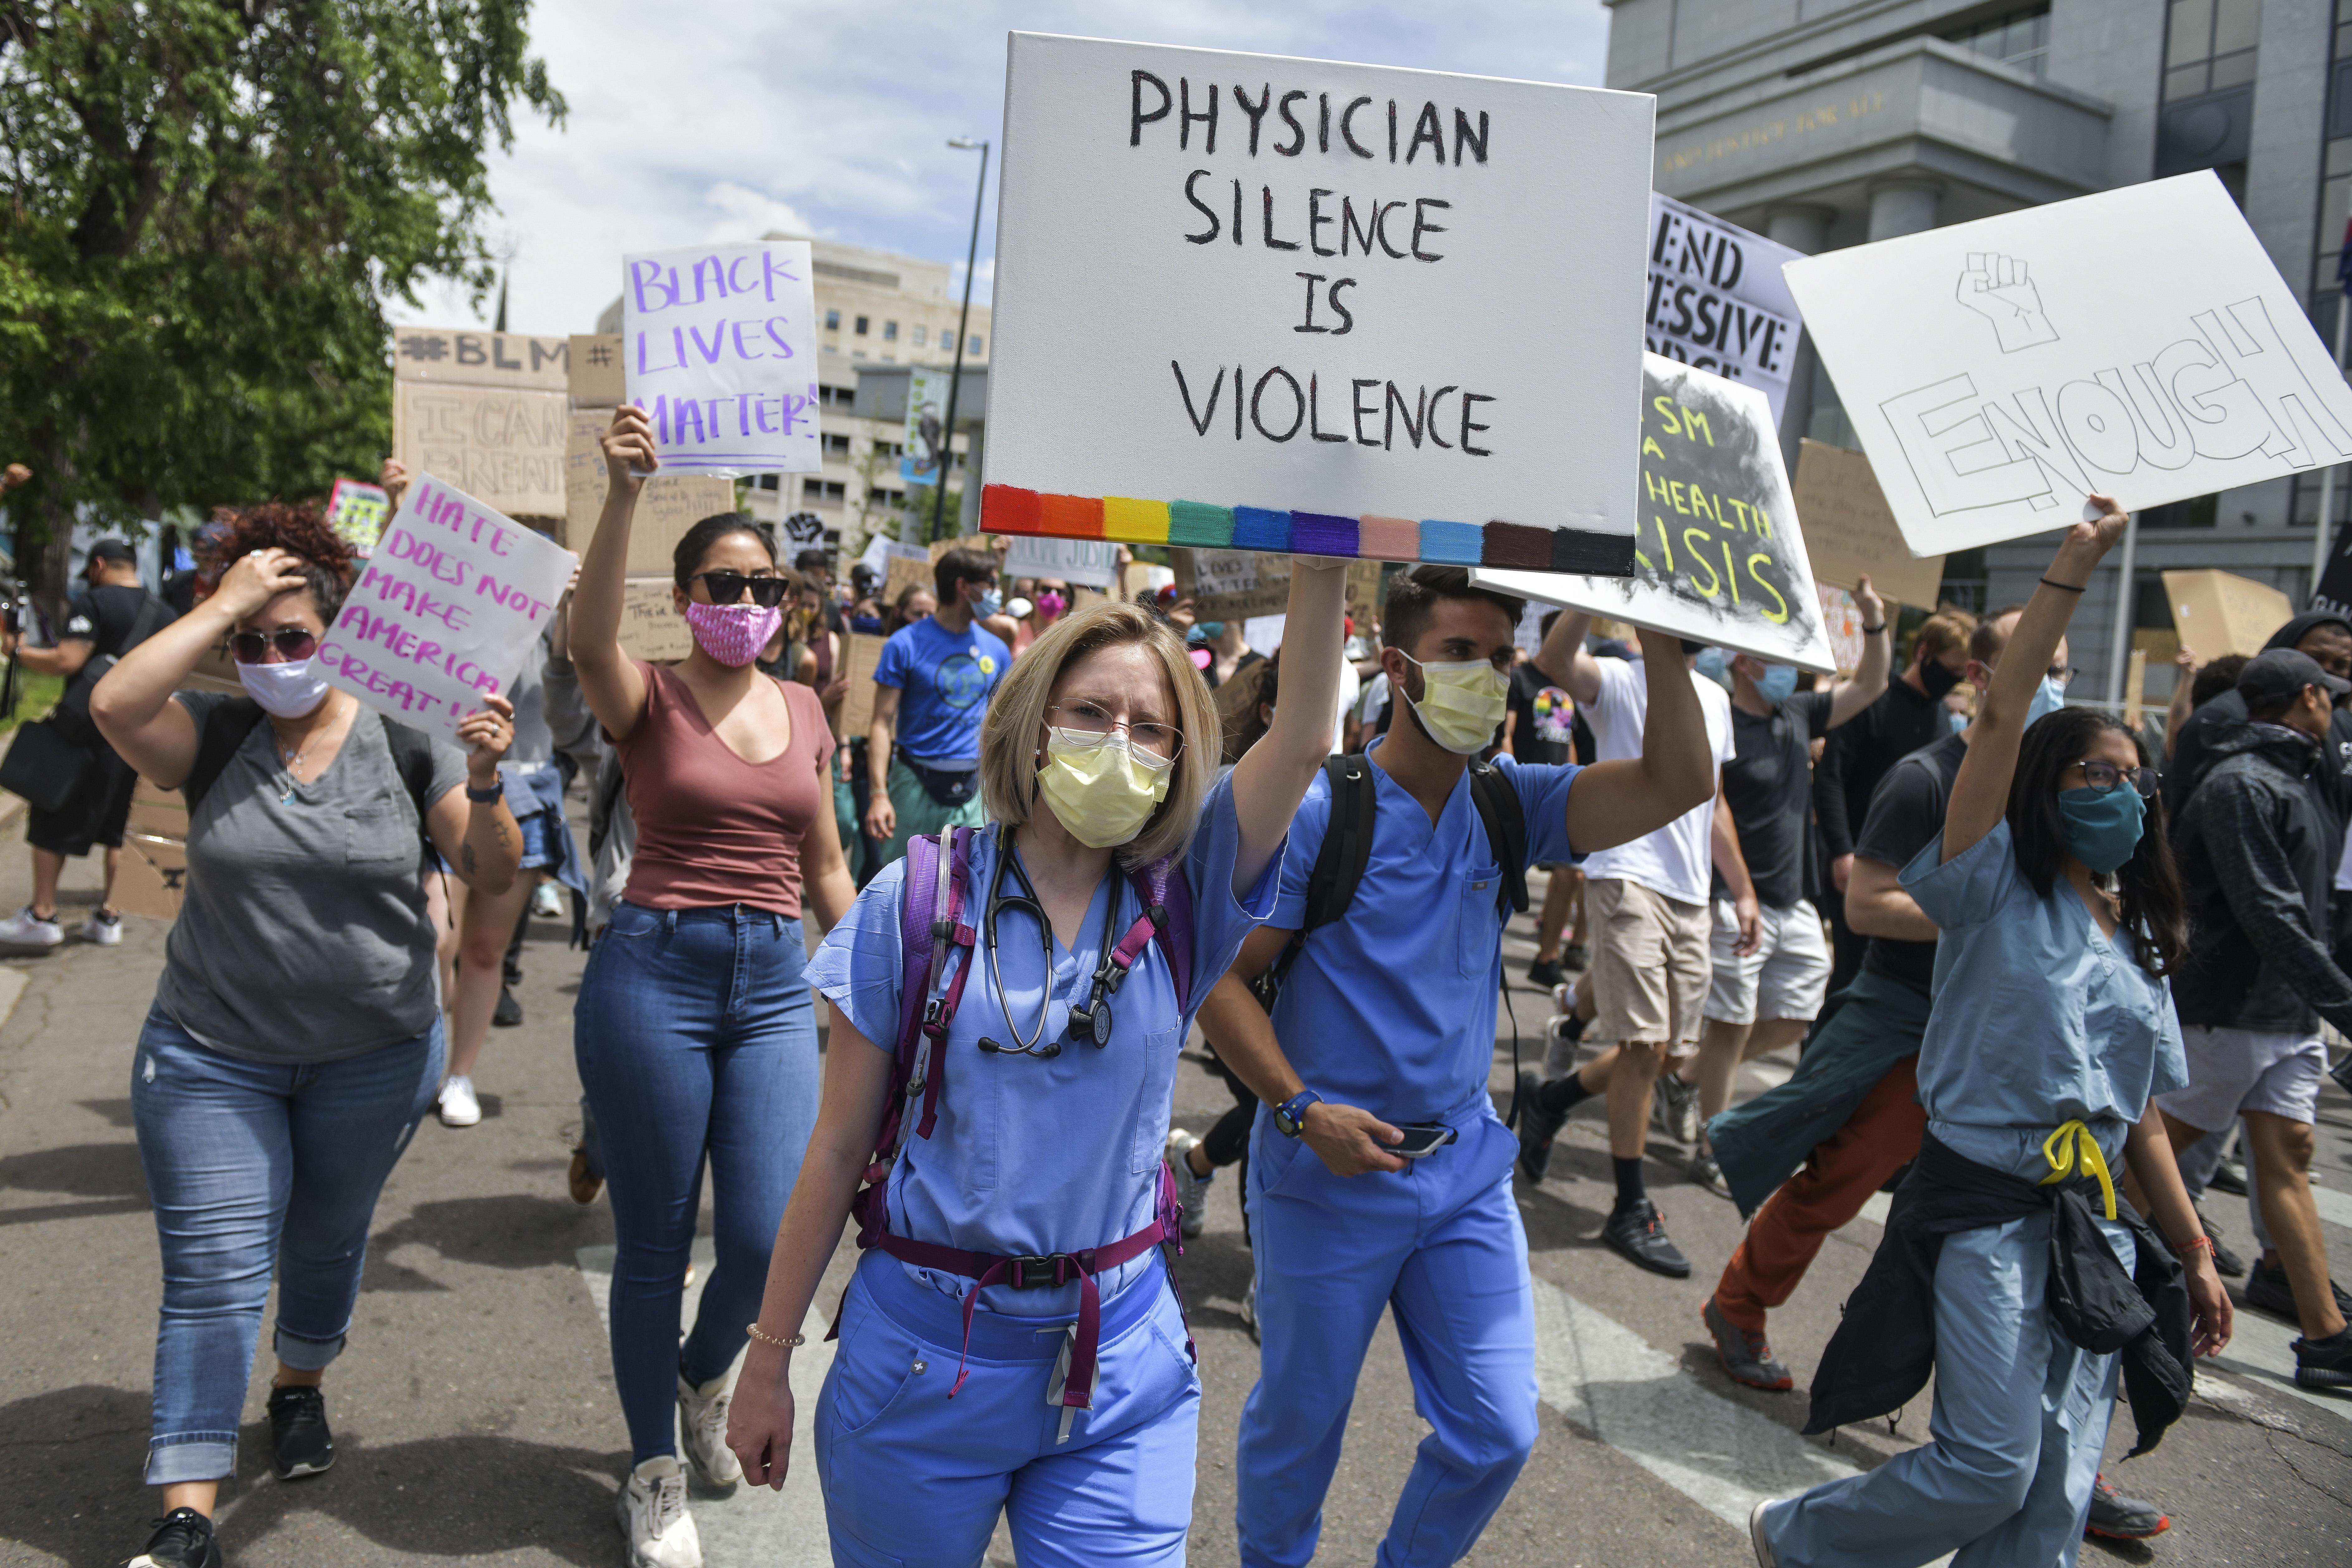 Physicians in scrubs march with other Black Lives Matter protesters. One physician holds a sign that says "Physician silence is violence."